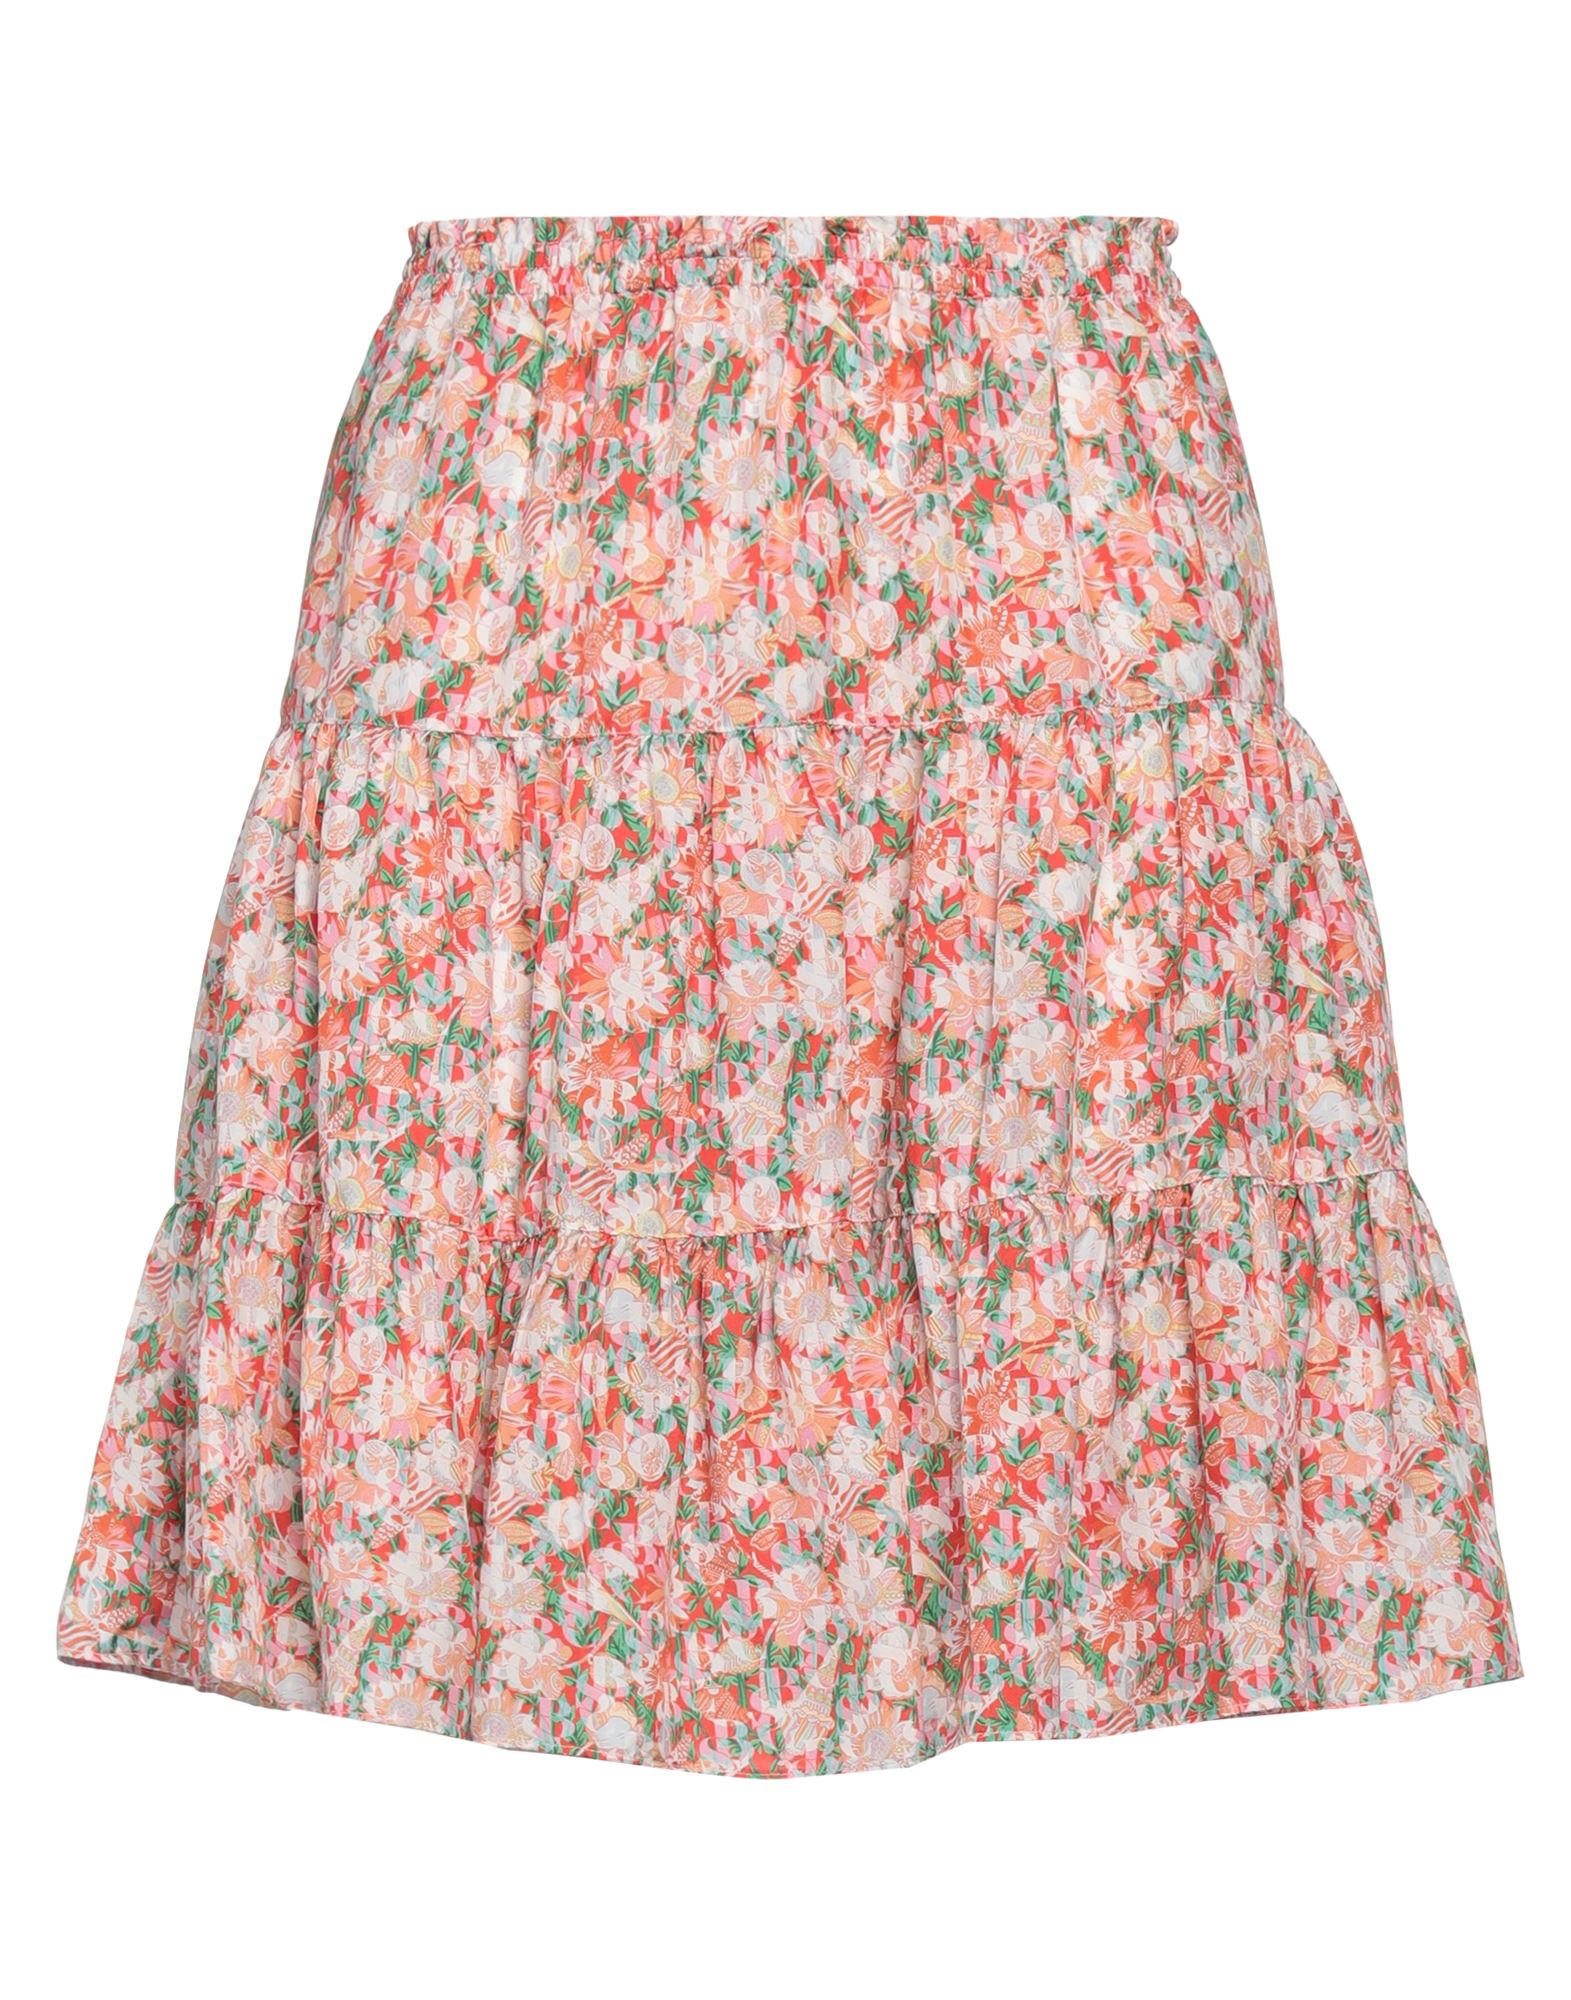 SEE BY CHLOÉ SEE BY CHLOÉ WOMAN MINI SKIRT CORAL SIZE 8 SILK